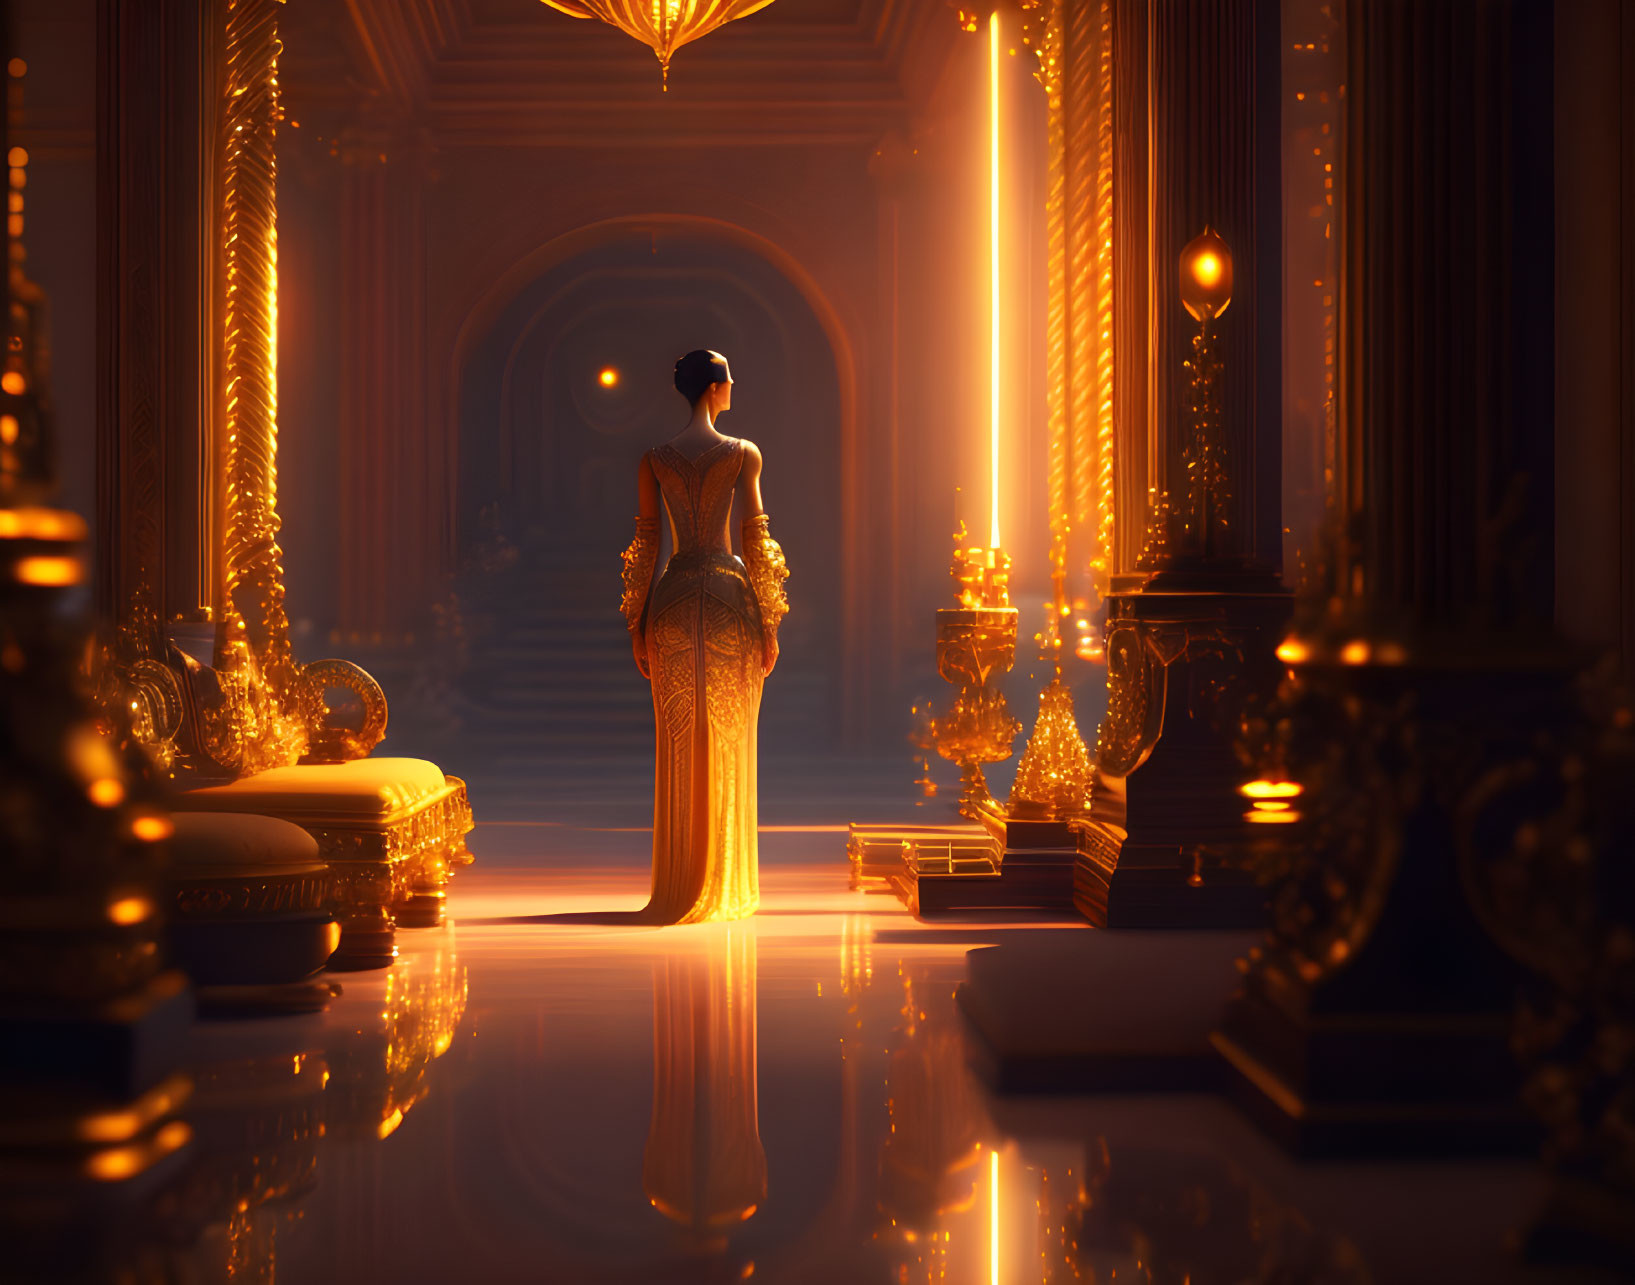 Elegant woman in gown in majestic sunlit hall with golden decor